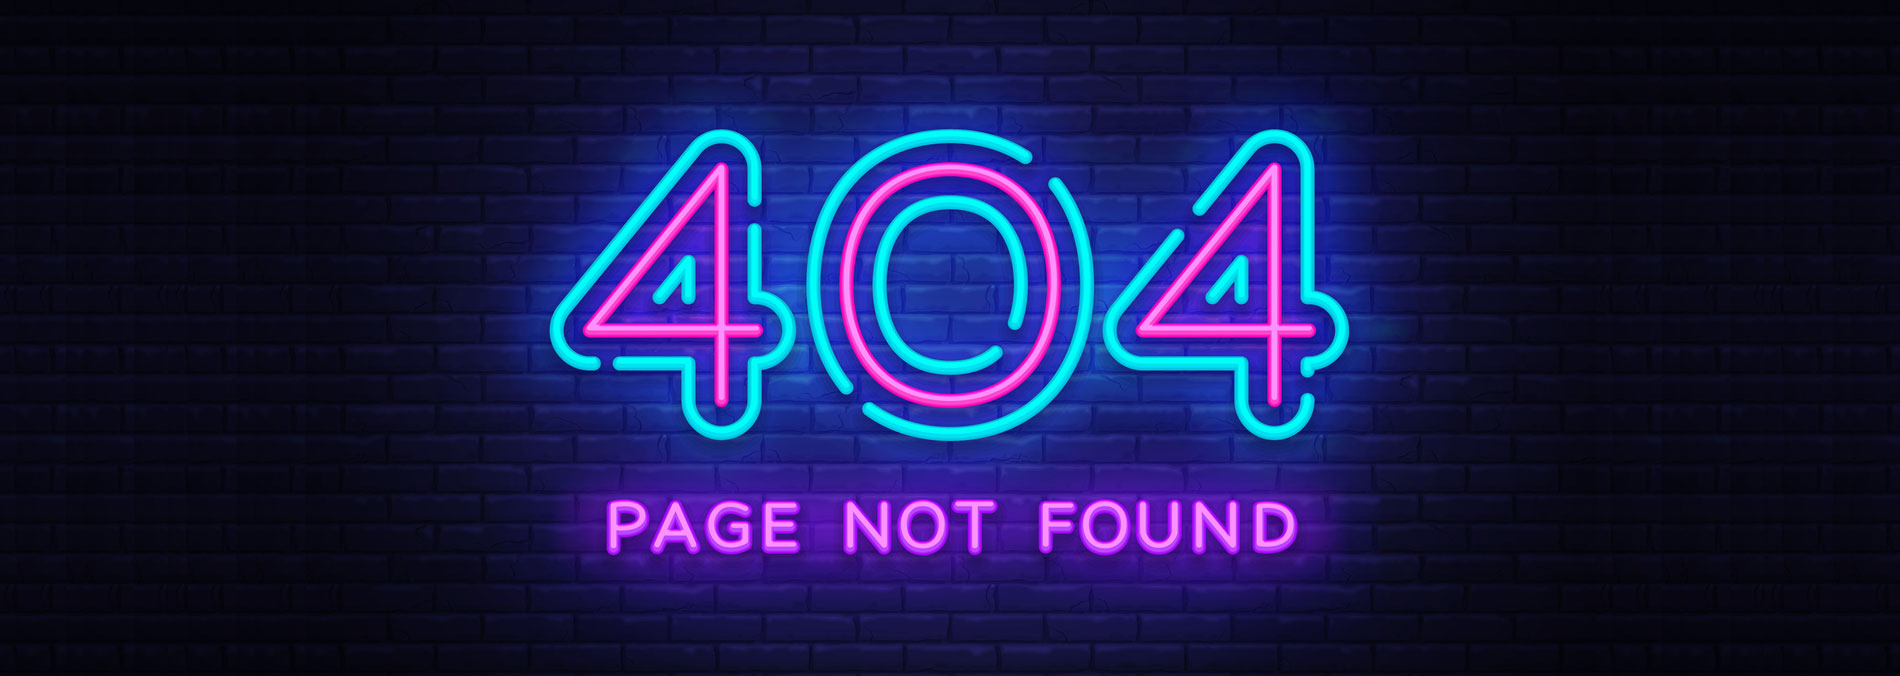 Rare Insight - 404 Page Not Found